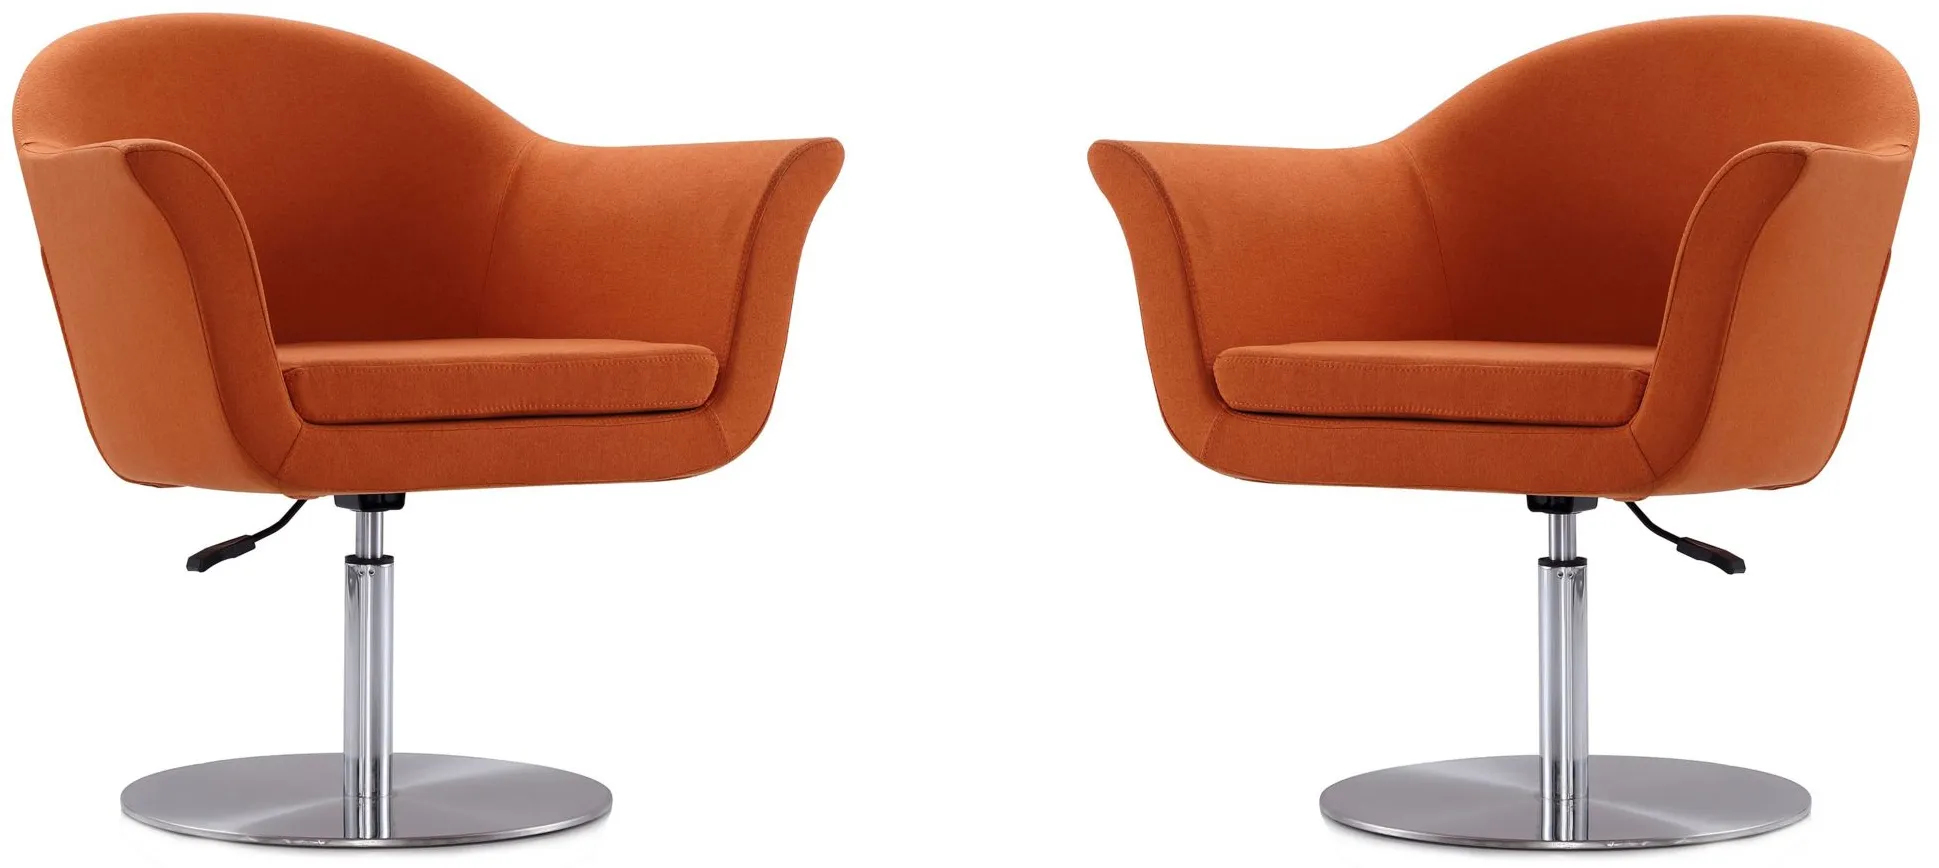 Voyager Swivel Adjustable Accent Chair (Set of 2) in Orange and Brushed Metal by Manhattan Comfort